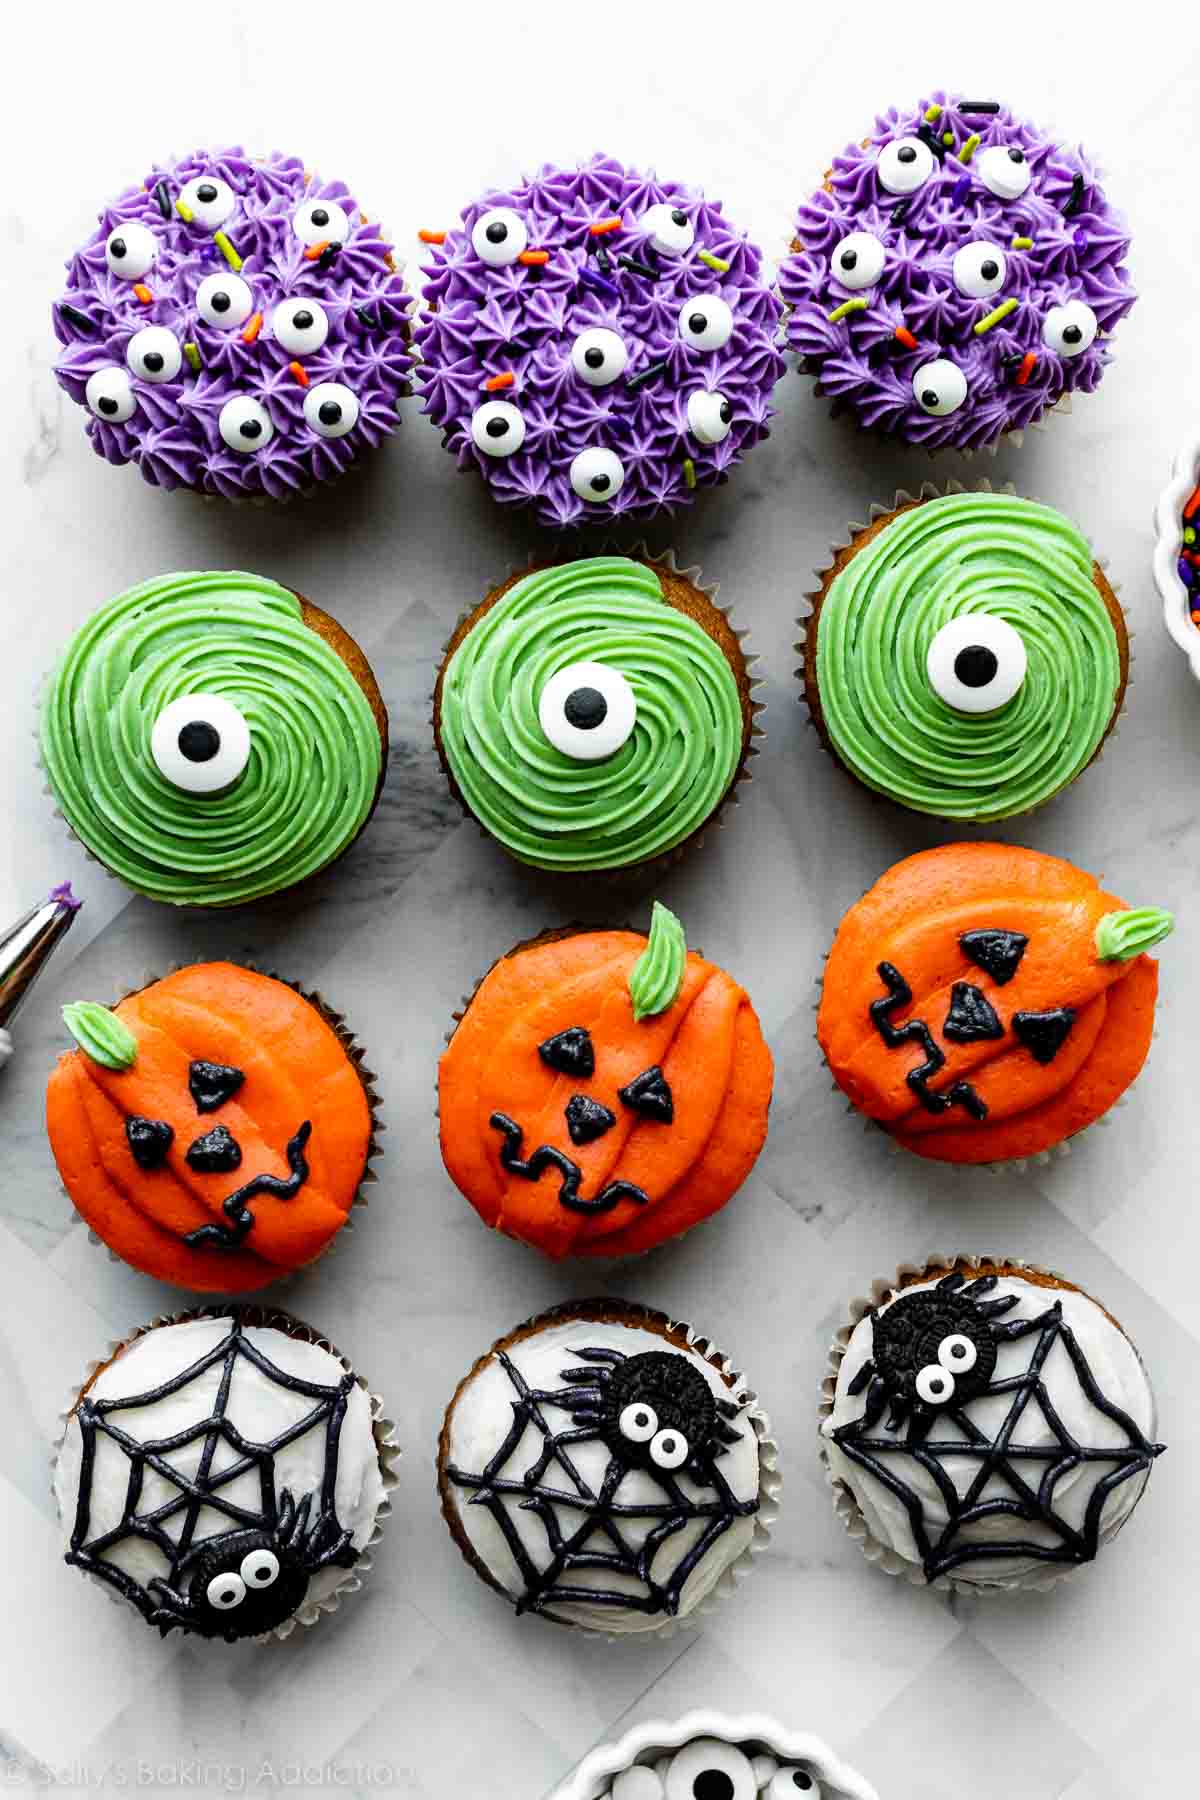 12 decorated Halloween cupcakes including purple monsters, green monsters, spiders and spider webs, and pumpkin Jack-O-Lanterns.